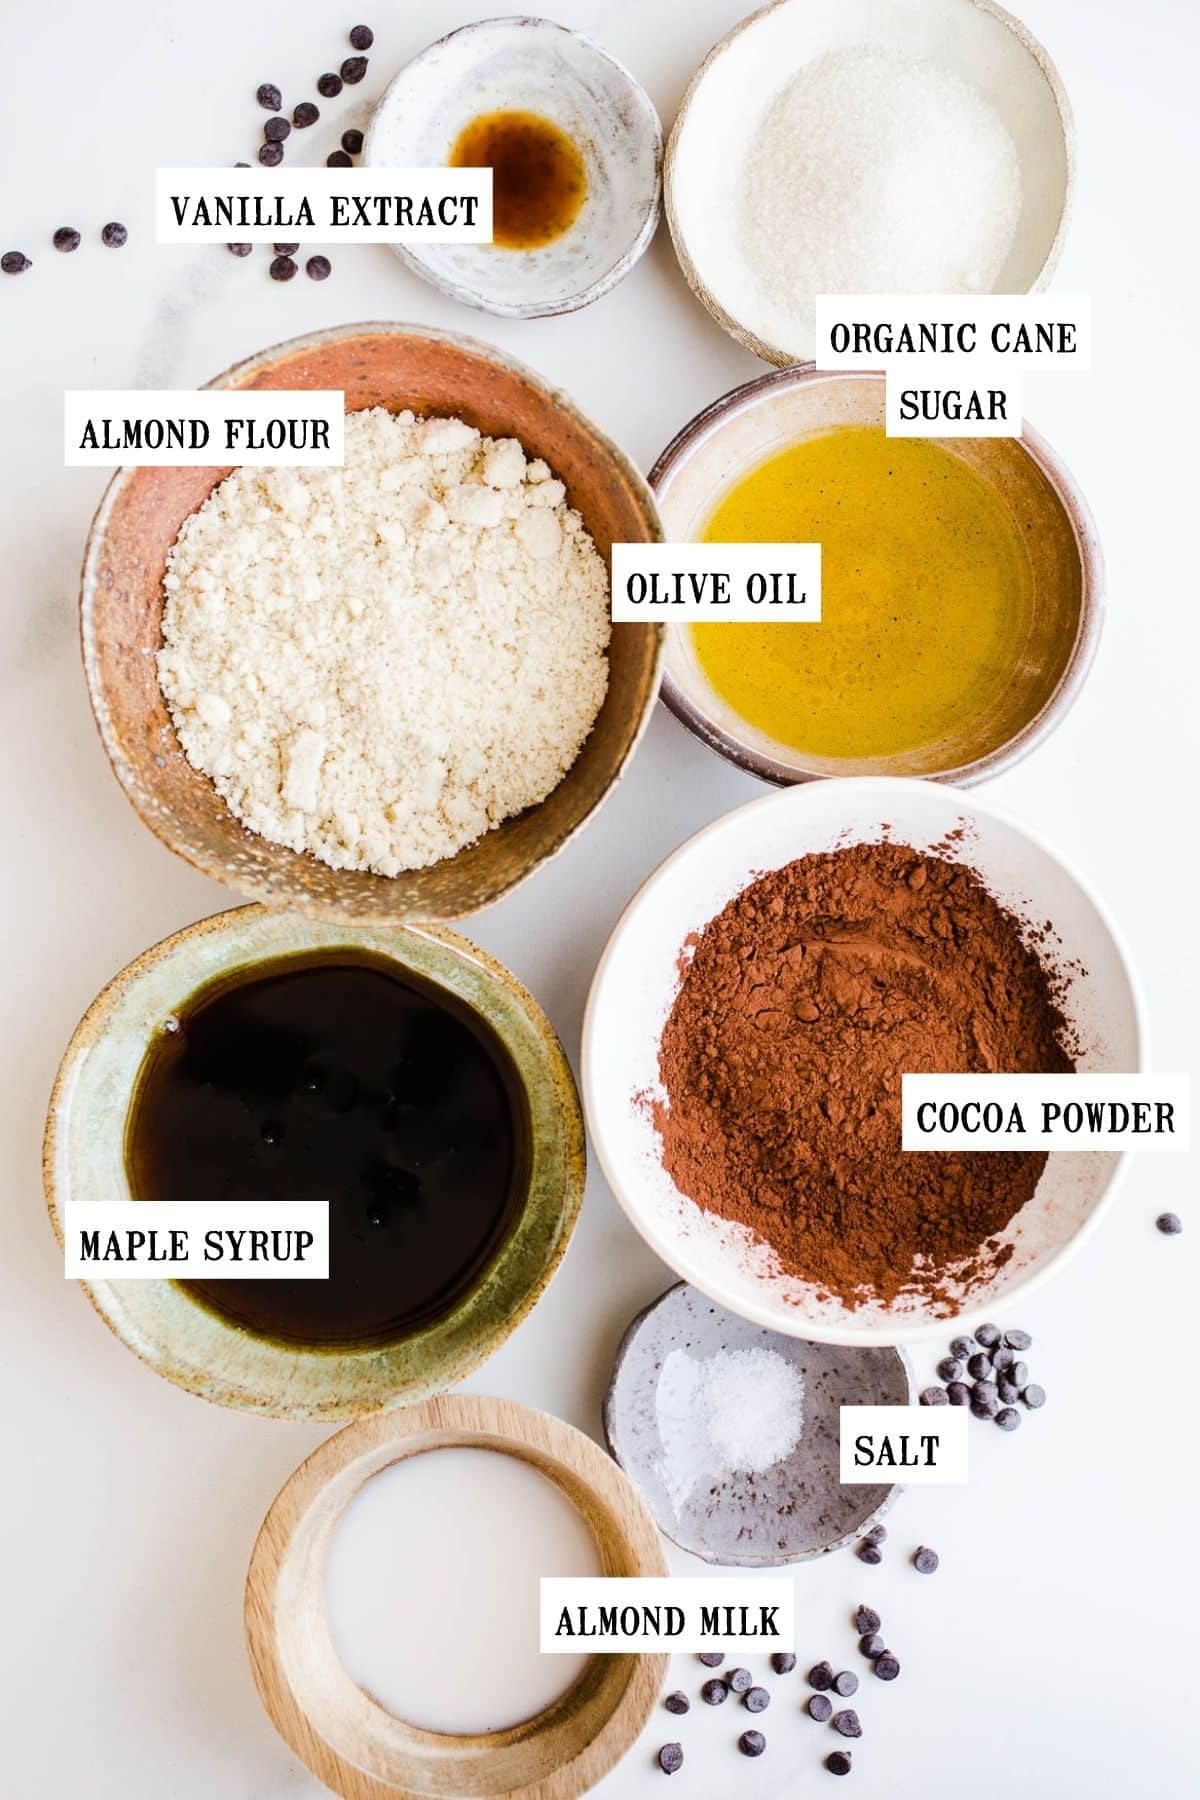 Ingredients in bowls of different sizes to make brownie batter.